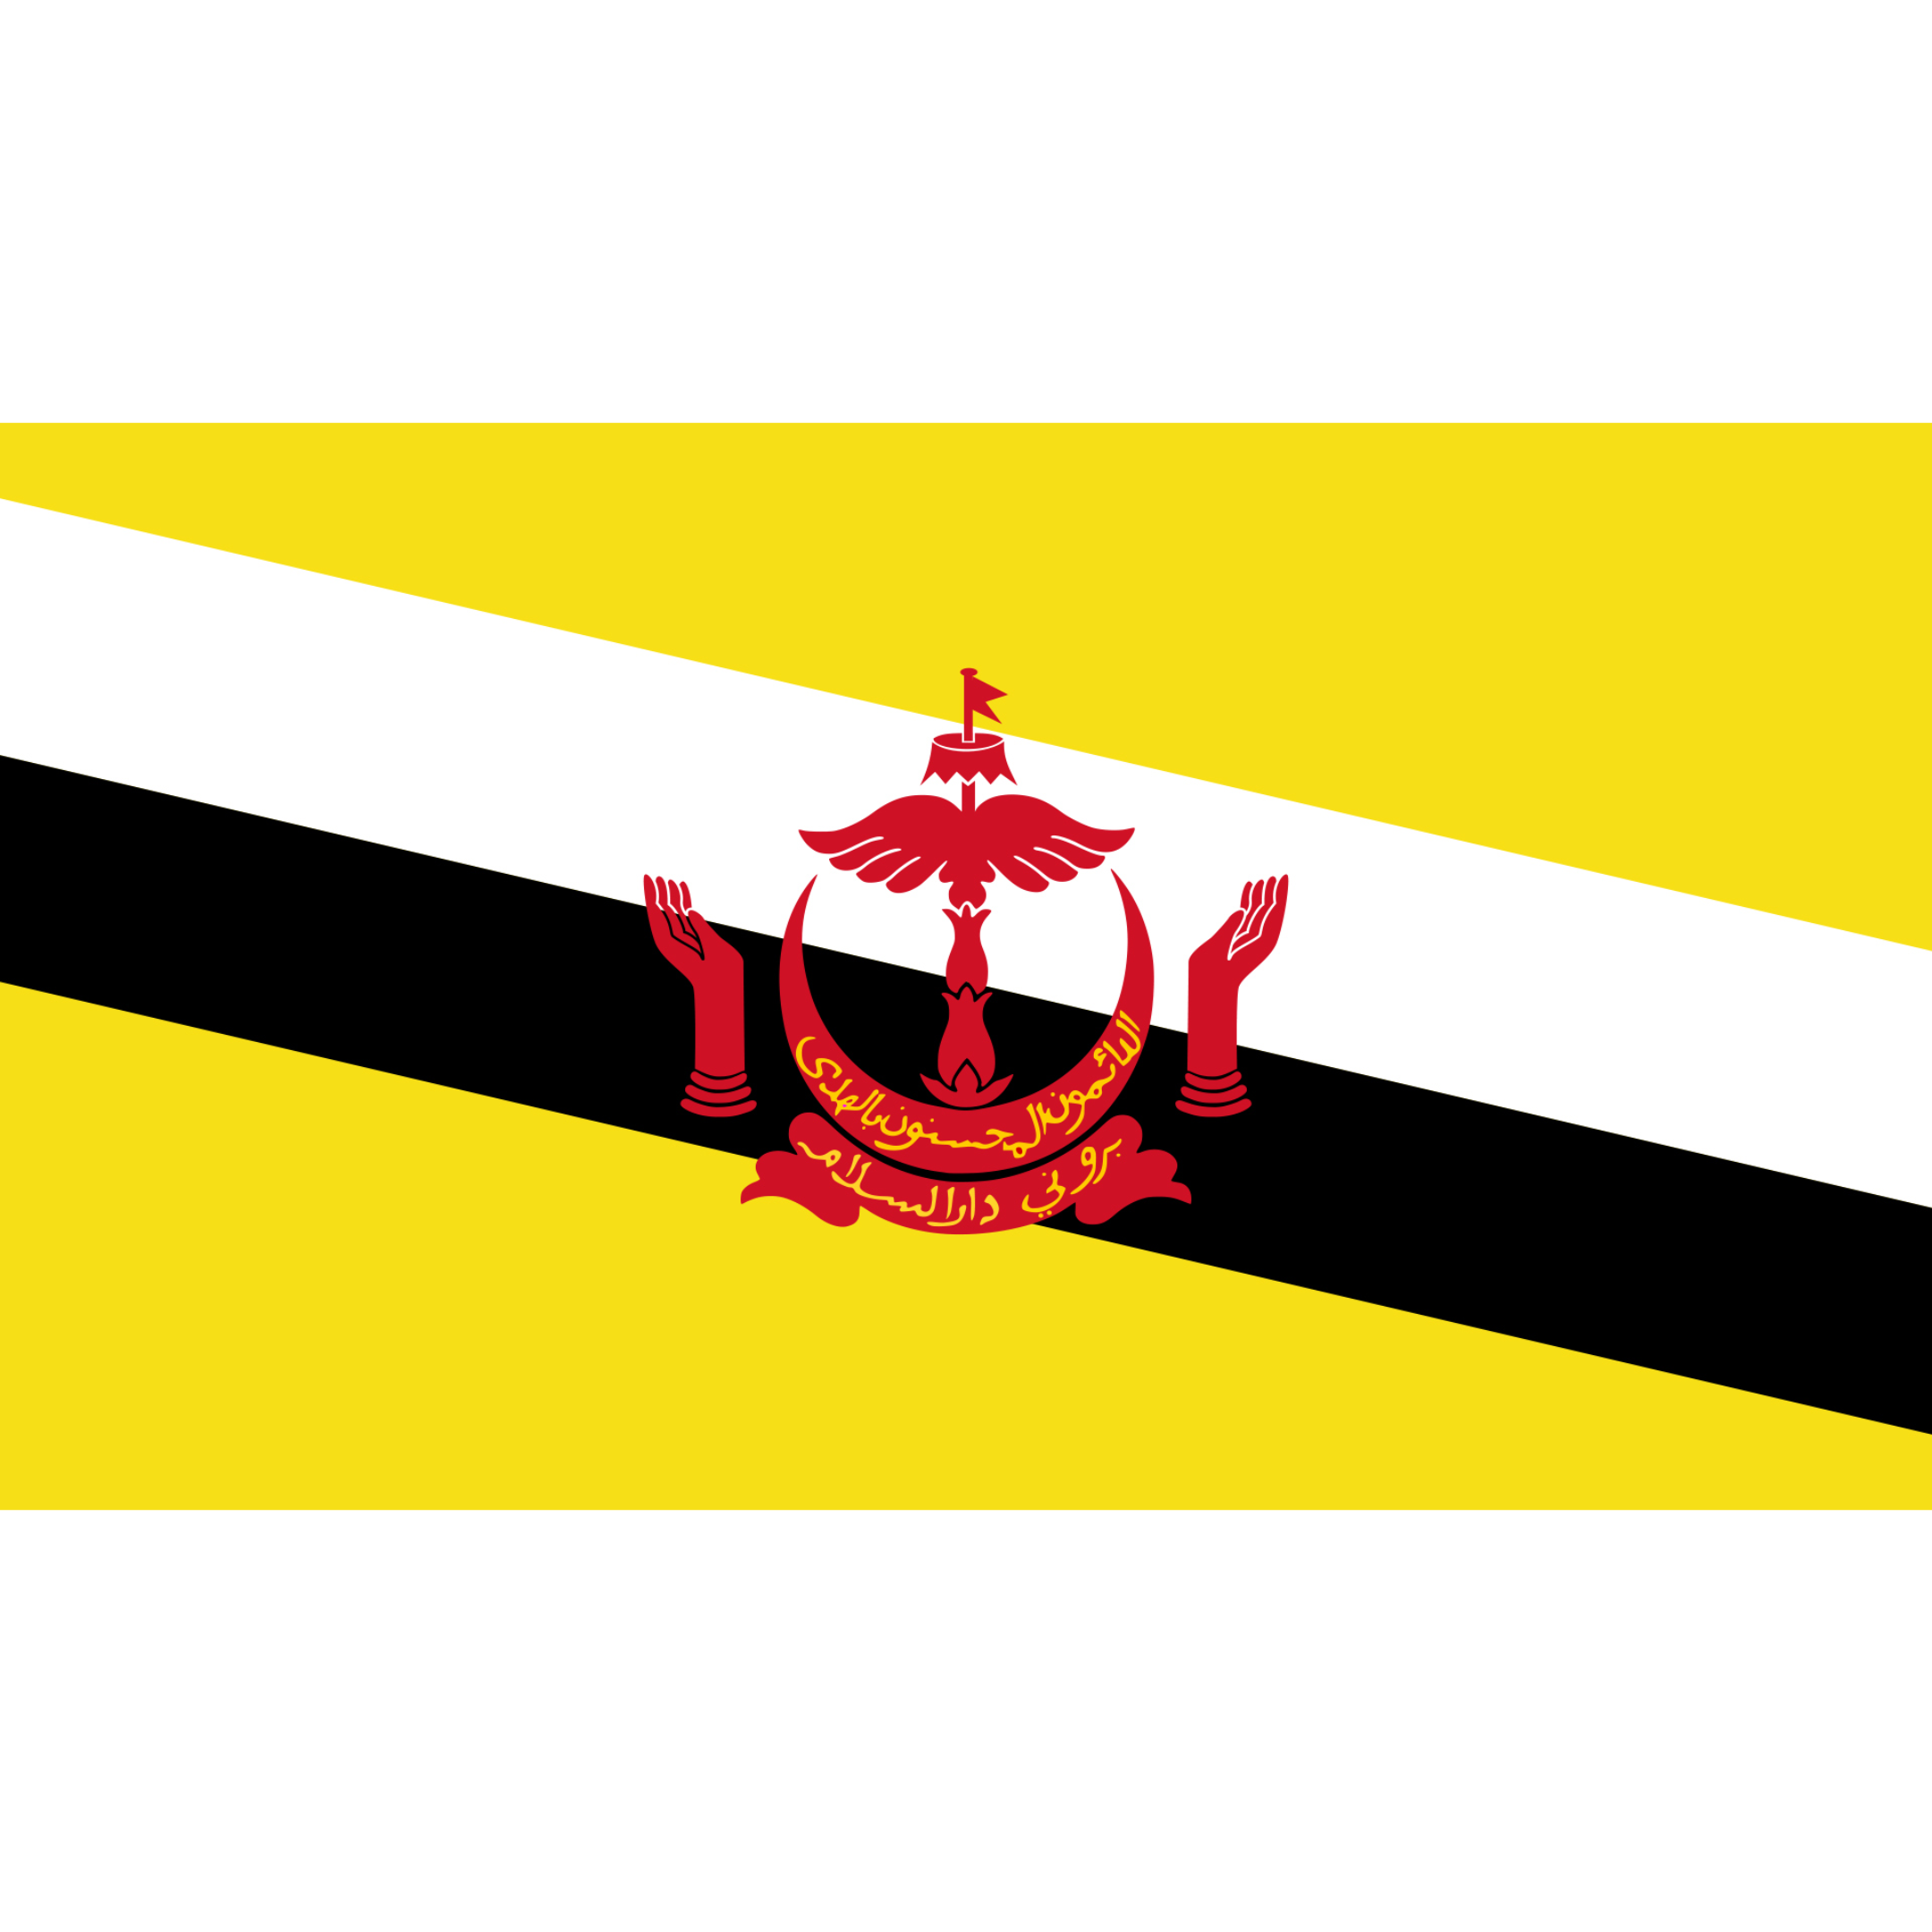 The Brunei flag has a yellow background with black and white diagonal stripes and the emblem of Brunei in the centre in red.